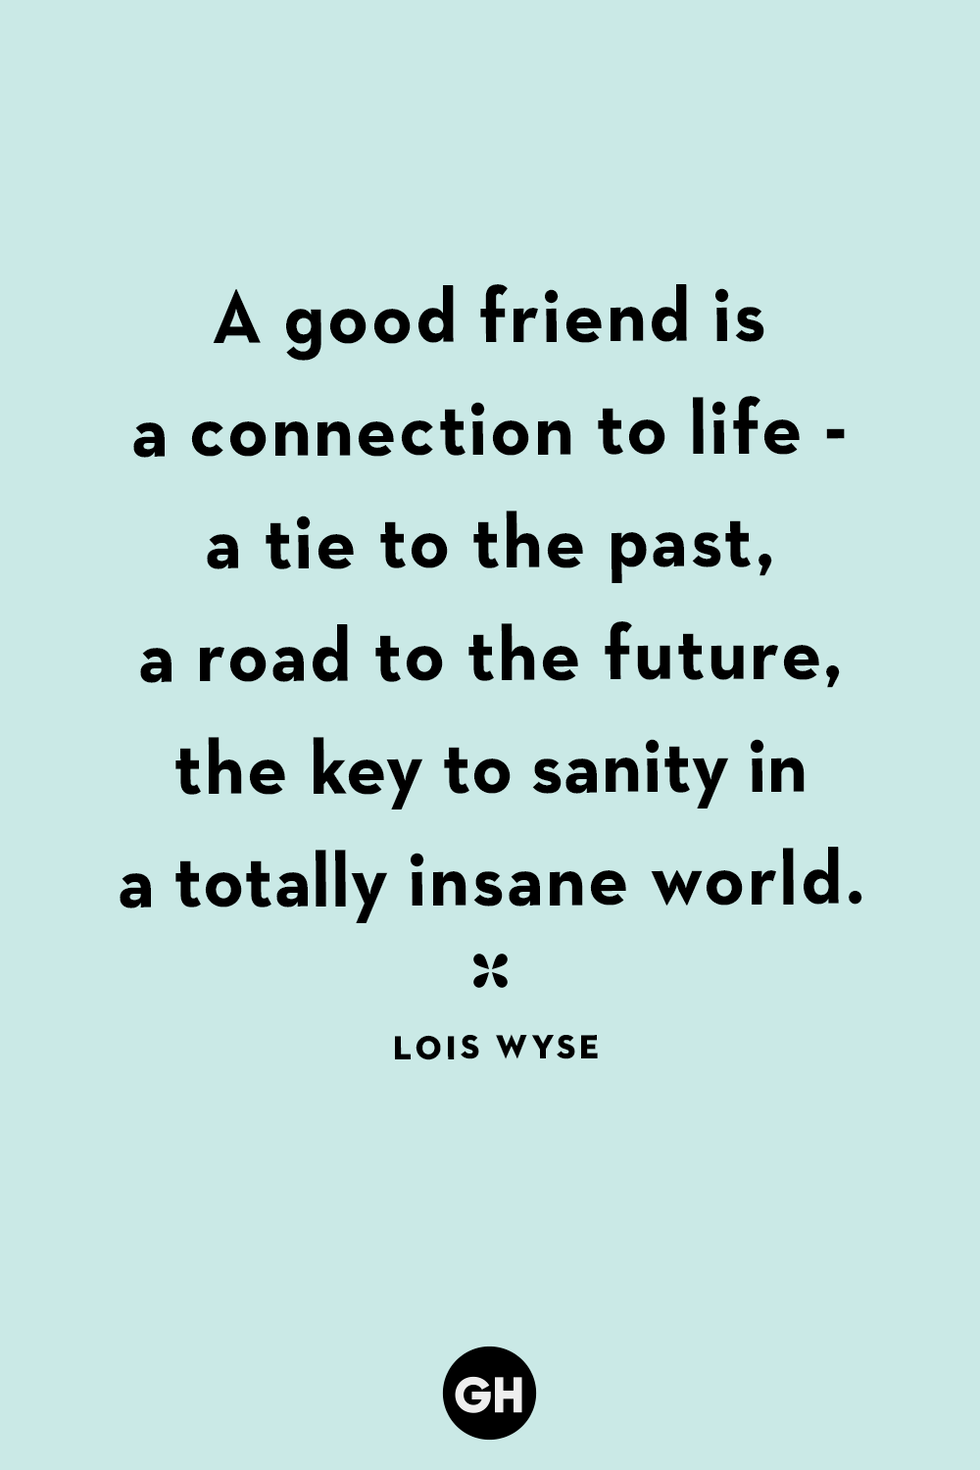 100 Short Best Friend Quotes - Friendship Quotes for Your BFF